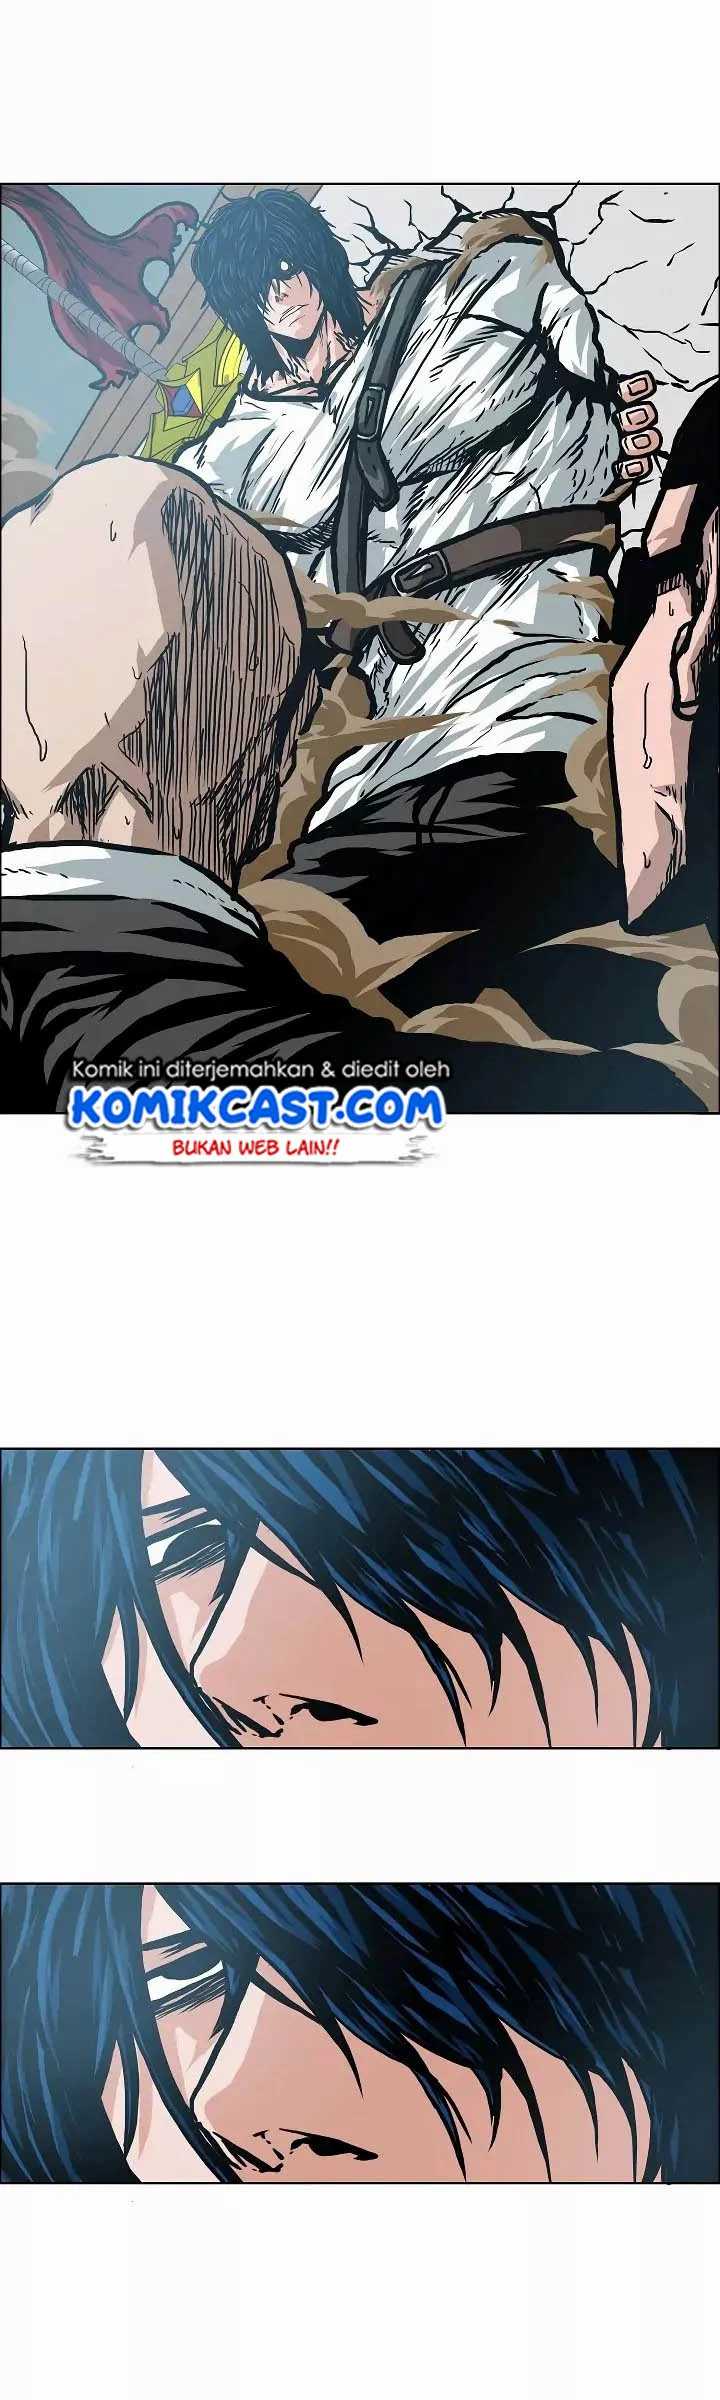 Rooftop Sword Master Chapter 22